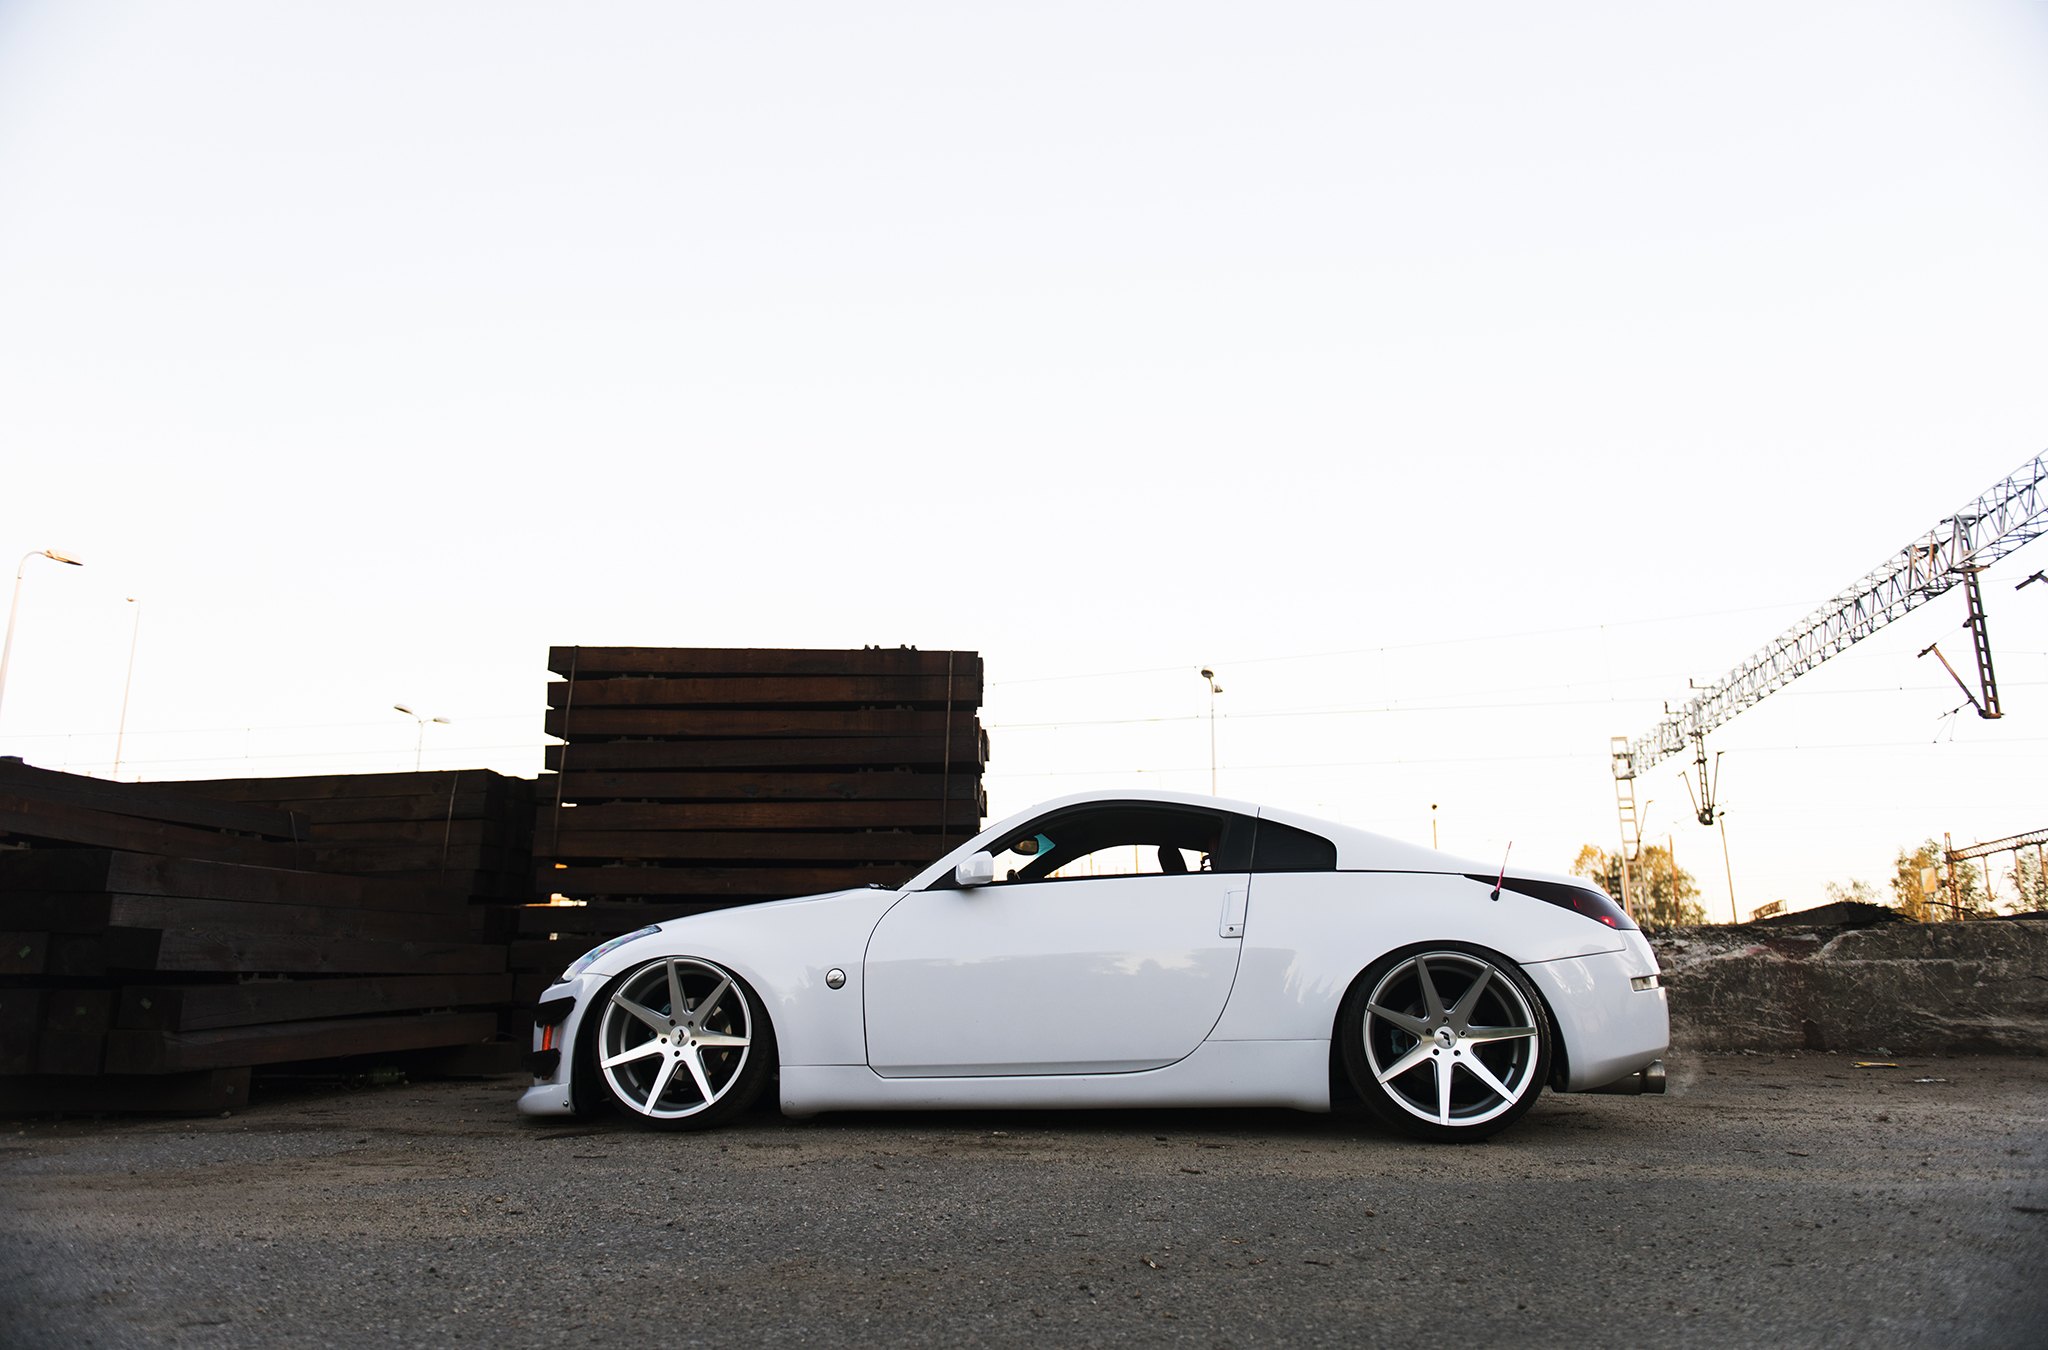 Aftermarket Side Skirts on White Stanced Nissan 350Z - Photo by JR Wheels